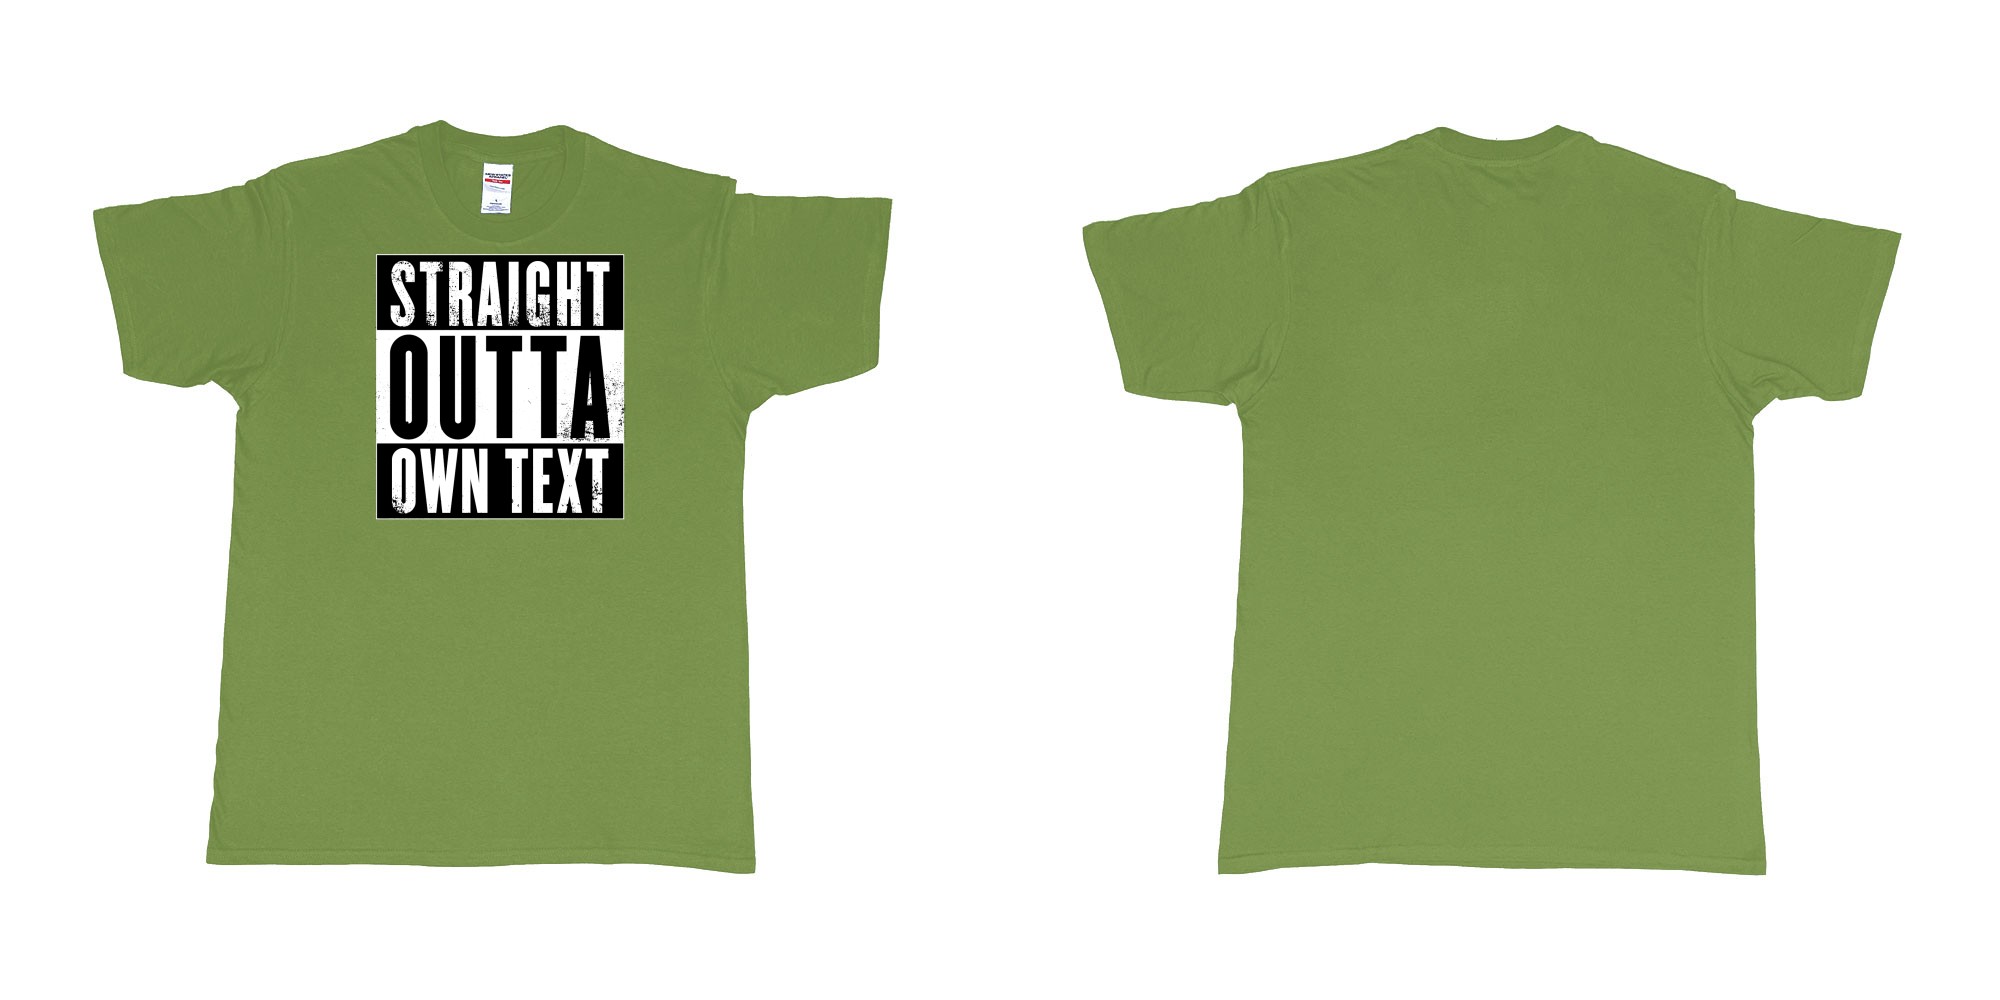 Custom tshirt design Straight Outta Compton in fabric color military-green choice your own text made in Bali by The Pirate Way